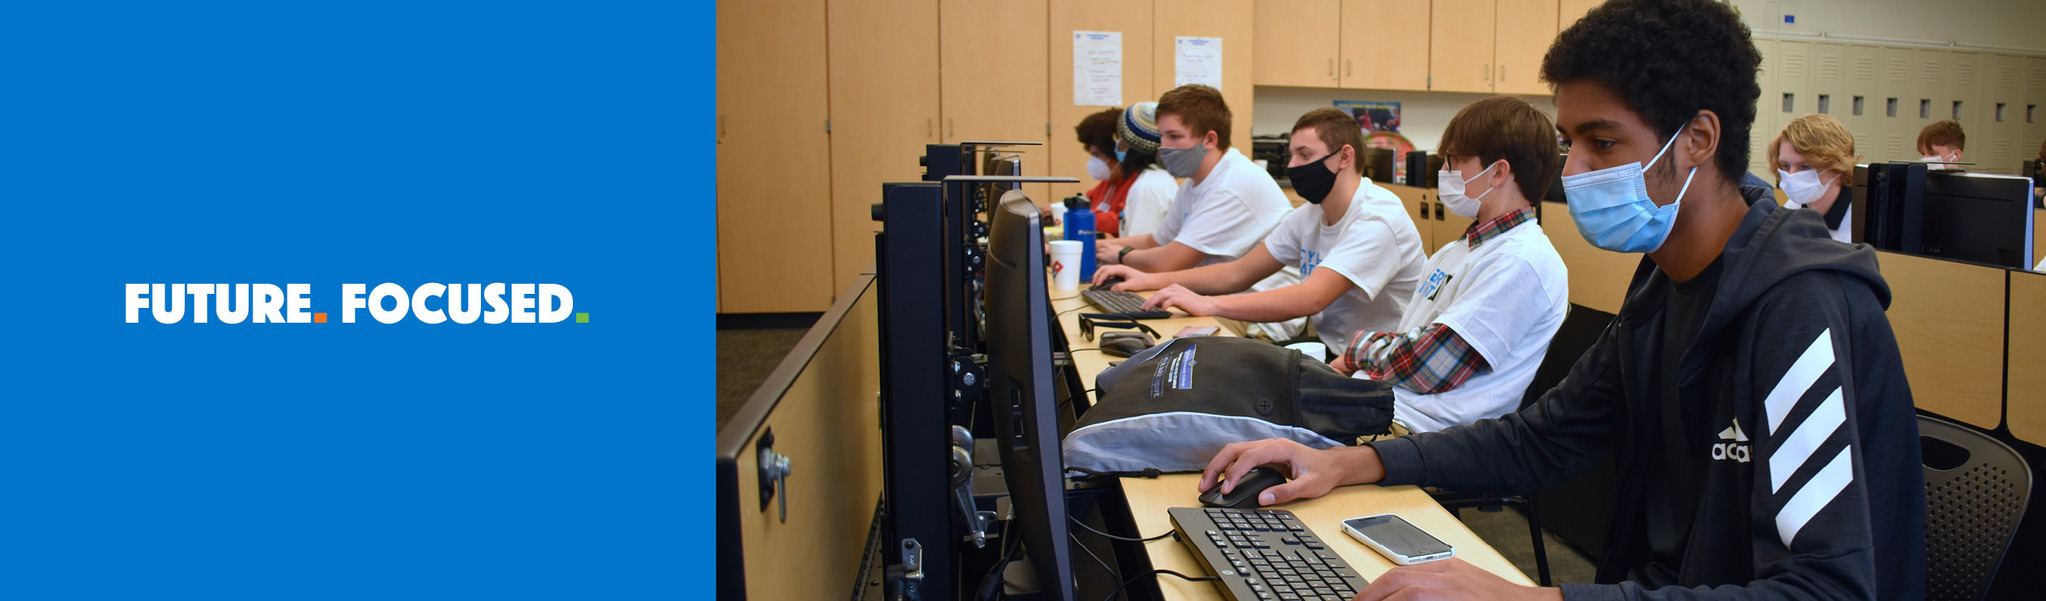 Internet, Network & Security Technologies students competing in a cyber security contest